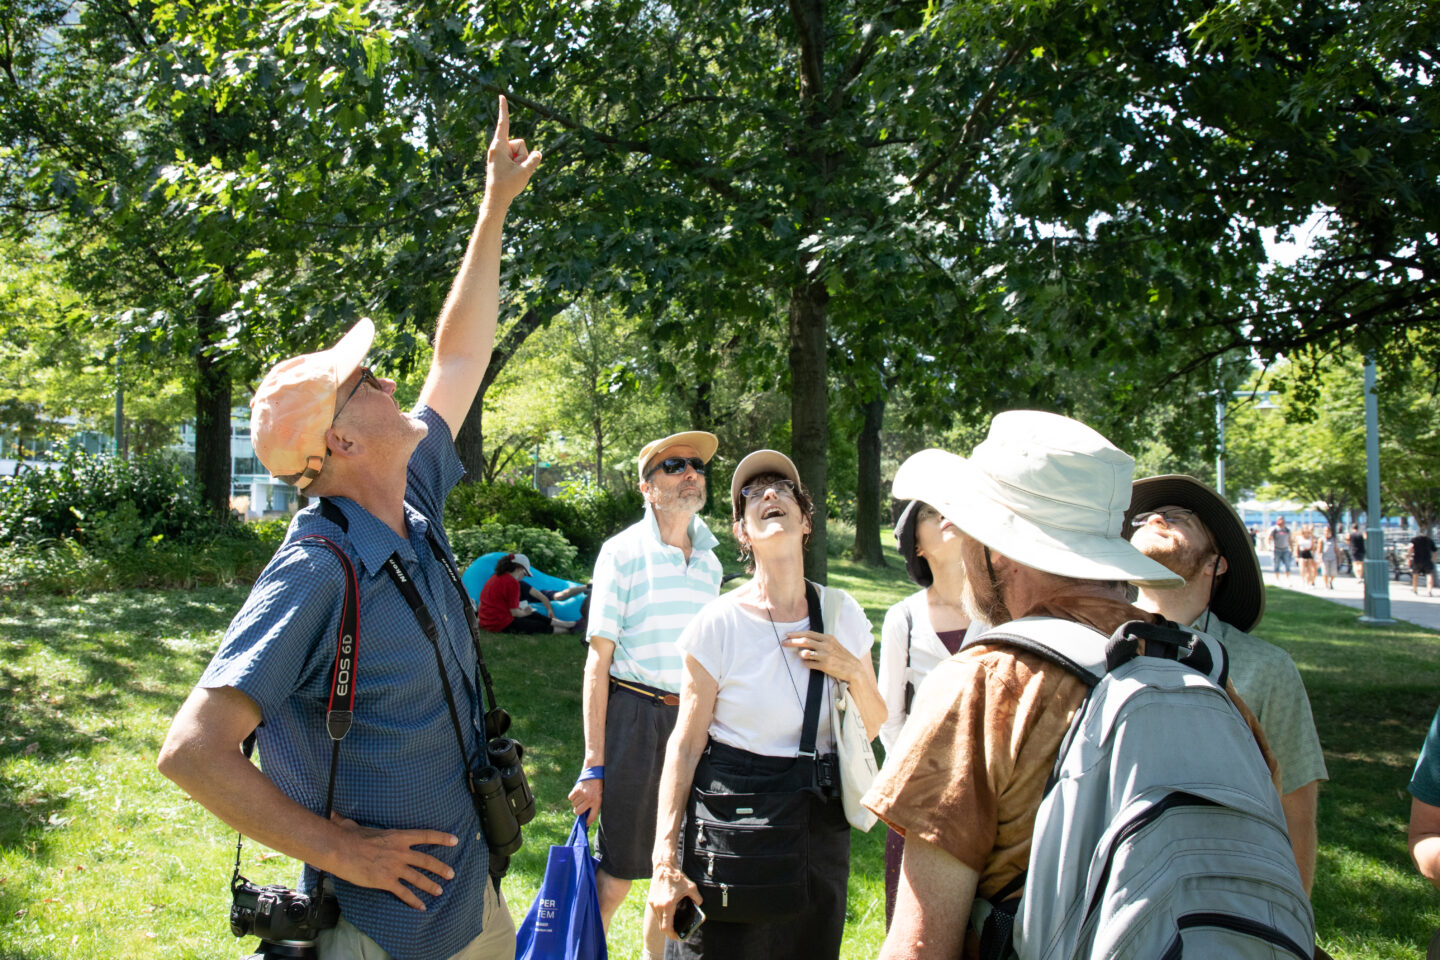 A Nature Walks guide points up to show participants something of interest in a tree above